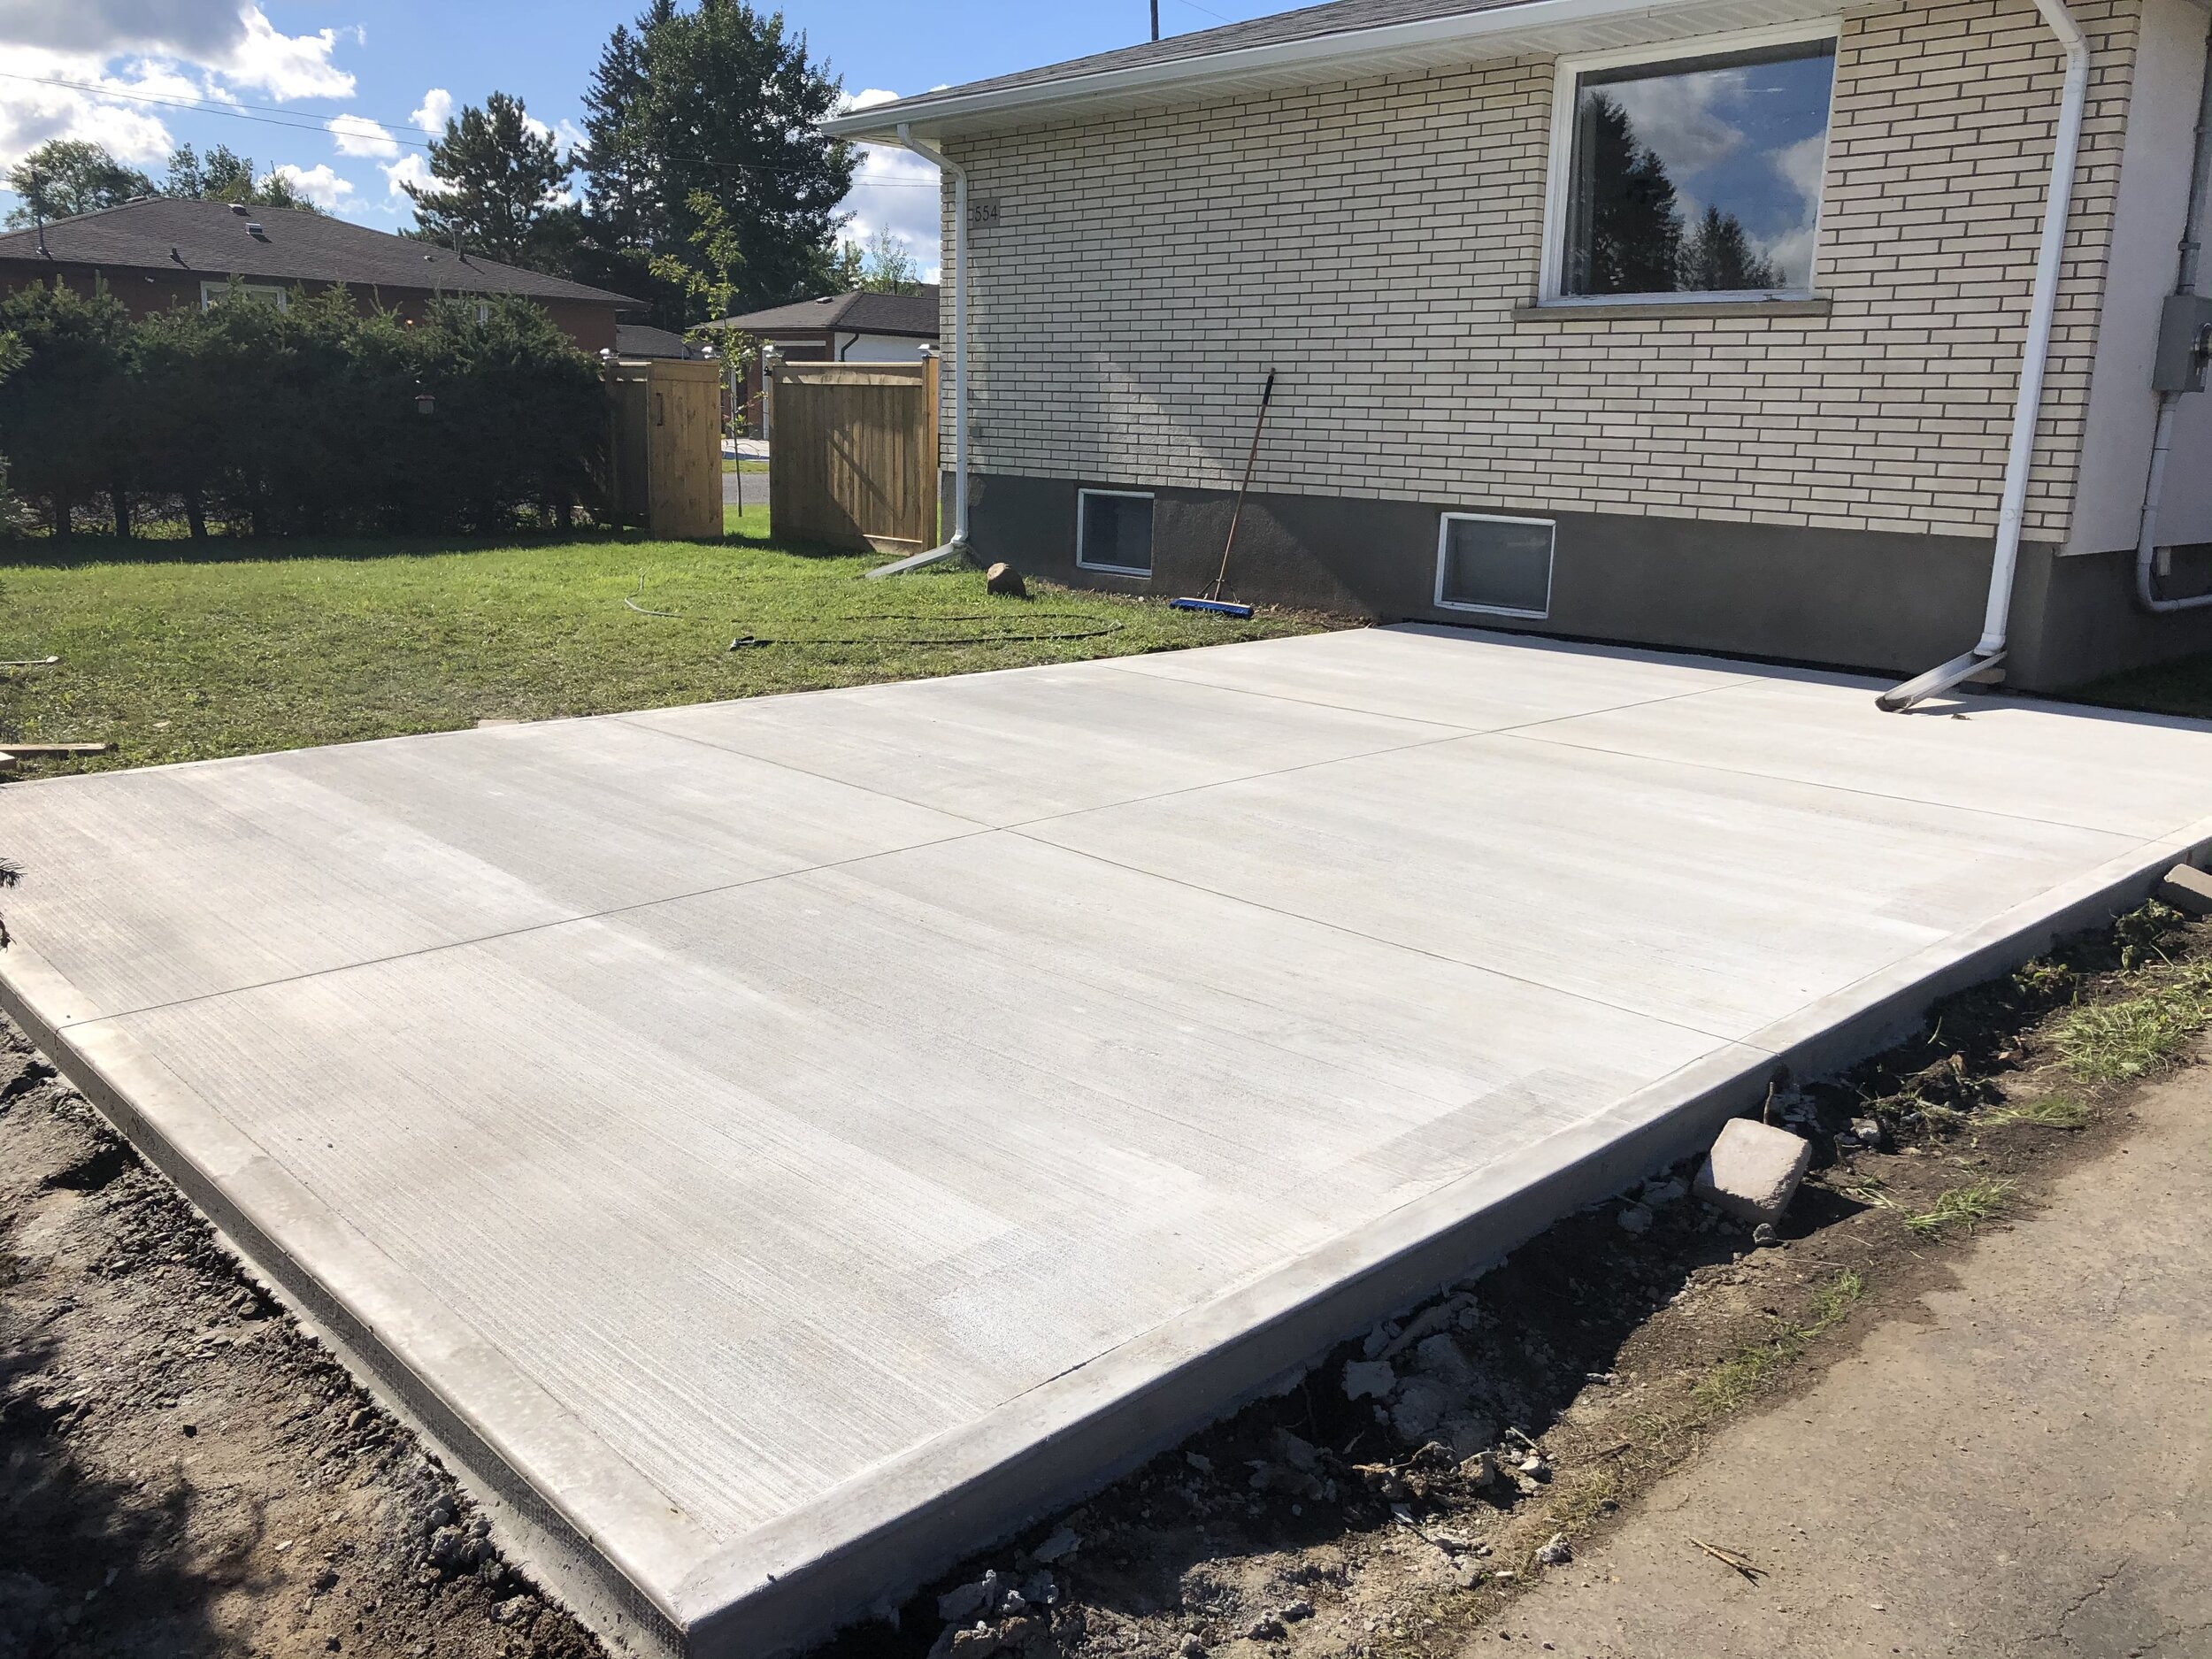 Poured Concrete Patio with a broom finish